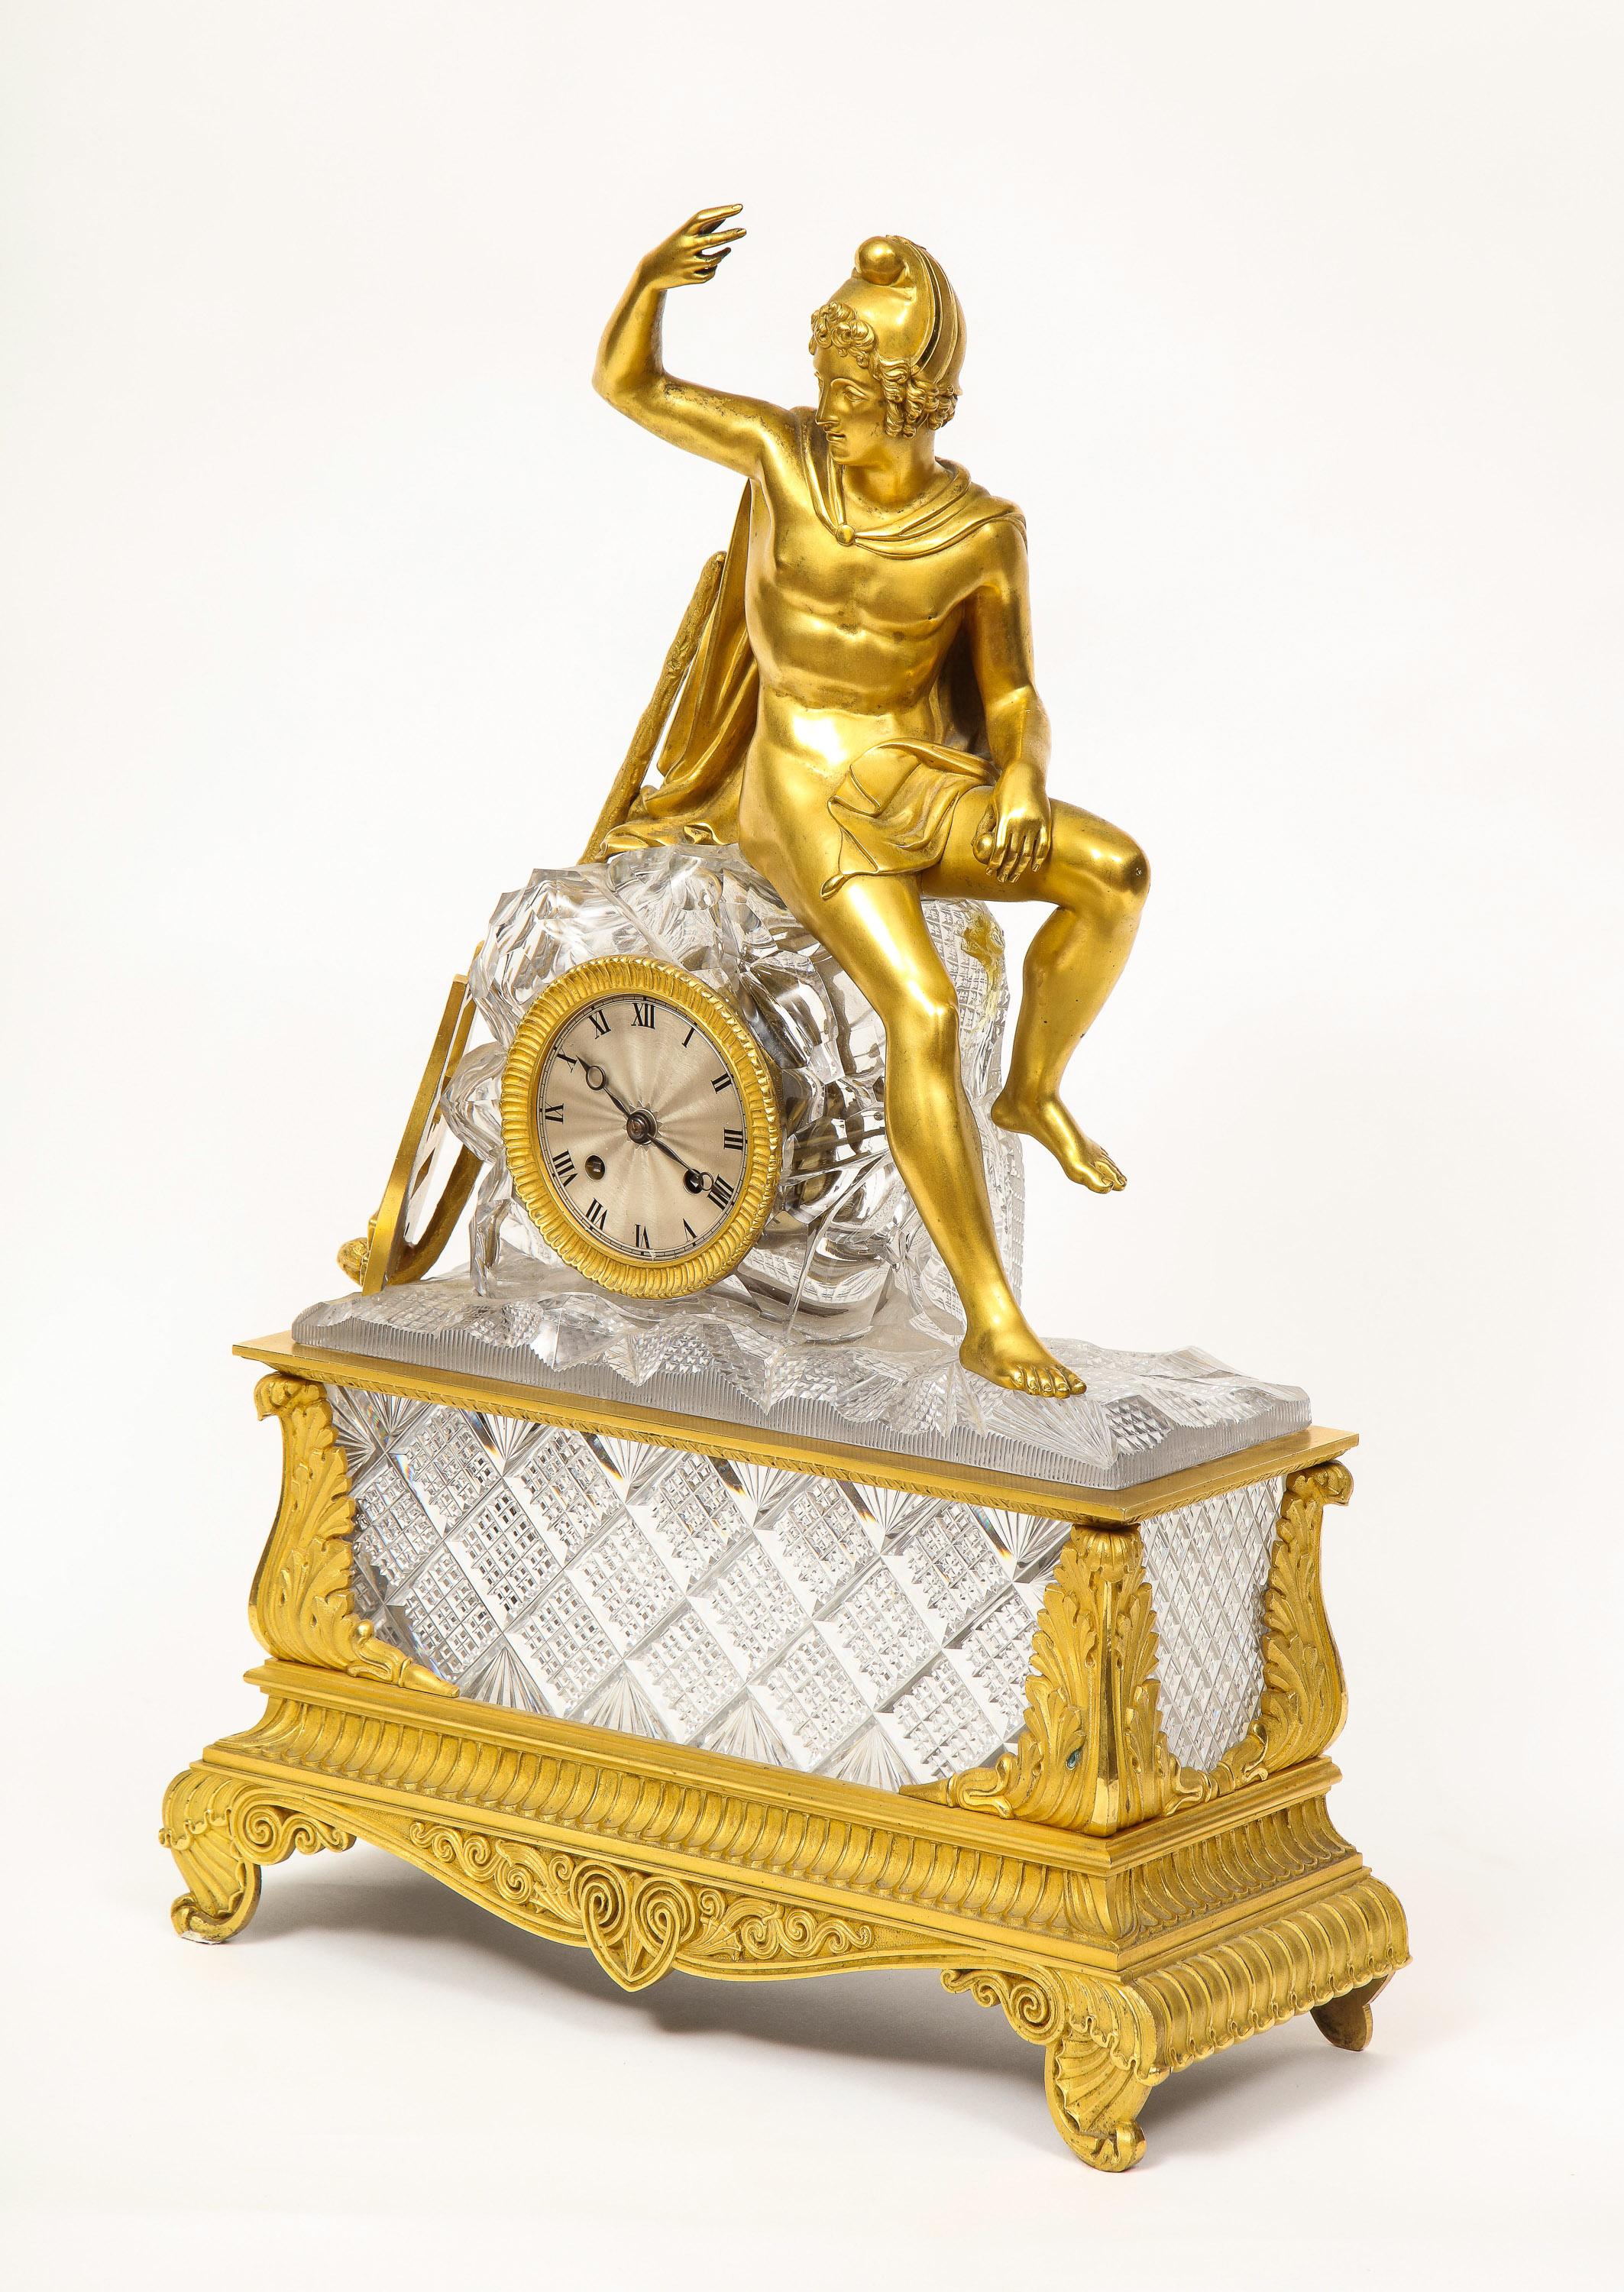 An exquisite French Empire ormolu and cut-crystal clock, c. 1815, attributed to Baccarat.

Made from the finest quality mercury gilding ormolu, this clock depicts an allegory seated on a rock, cased with carved precious cut-glass panels in the